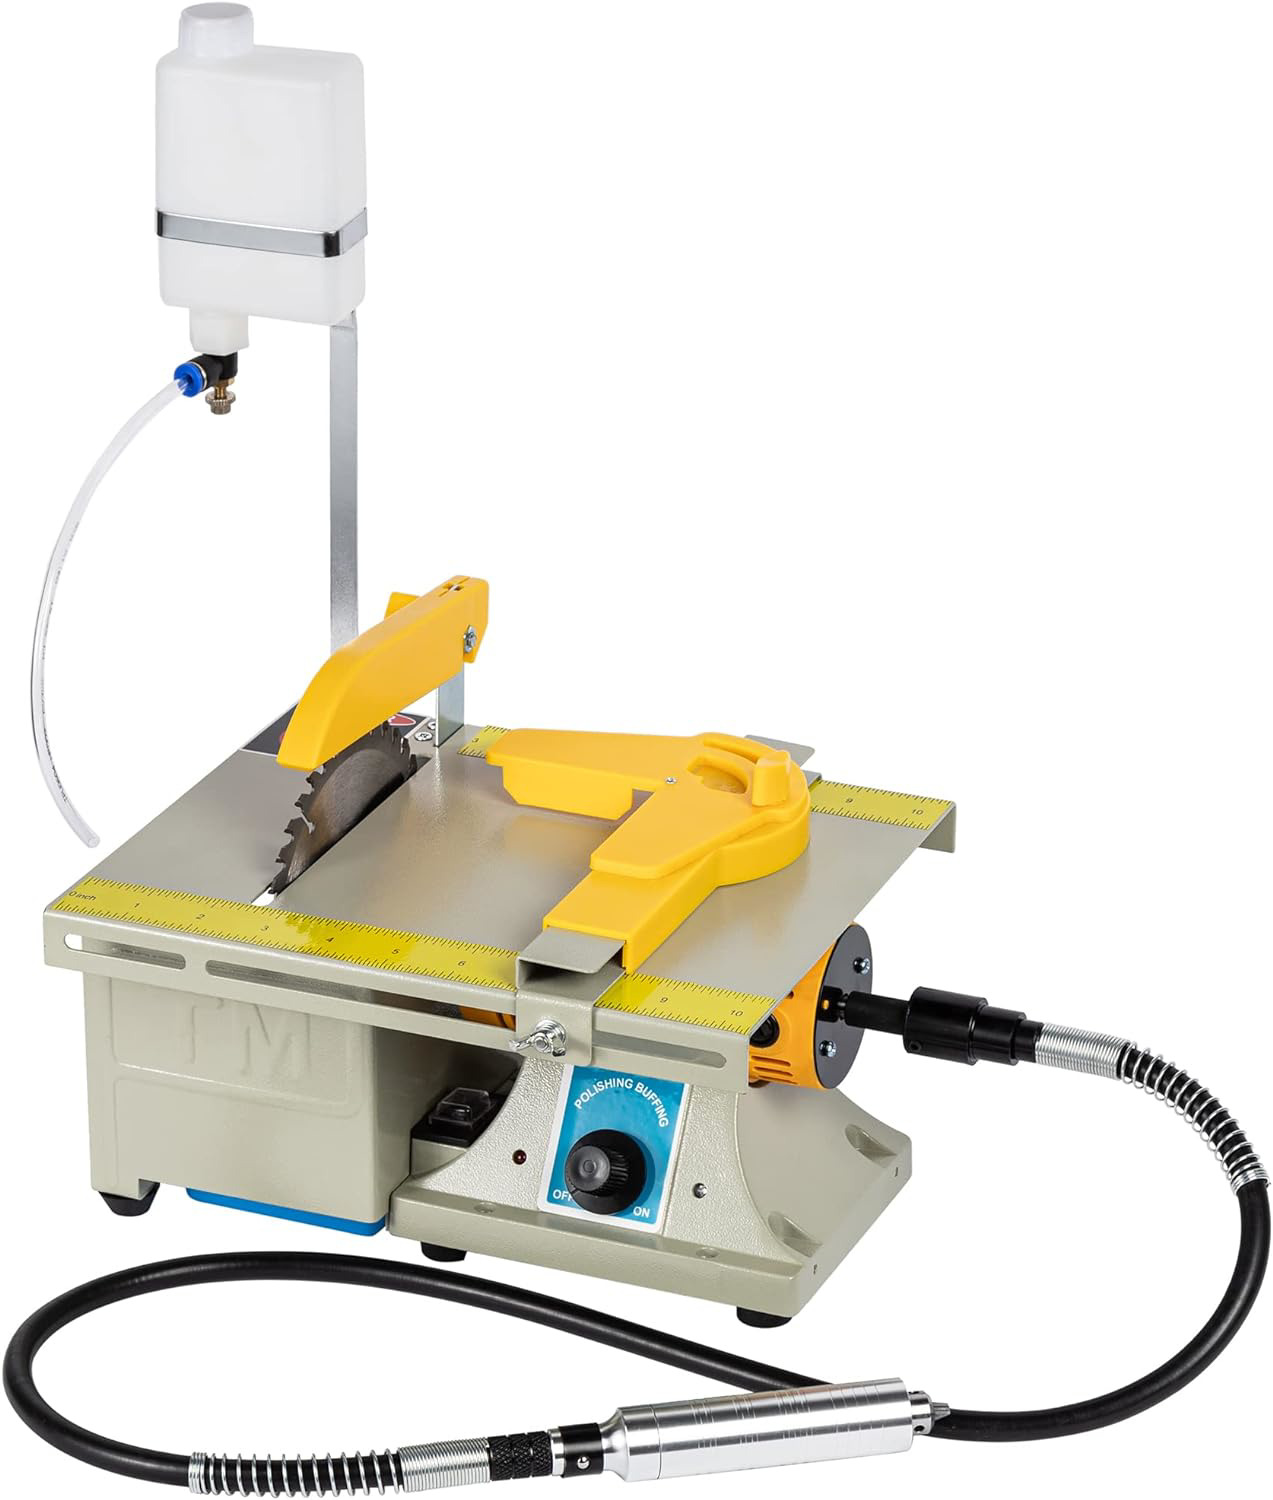 Jewelry Lapidary Saw for Cutting Rocks DIY Lapidary Equipment, 110V Mini Table